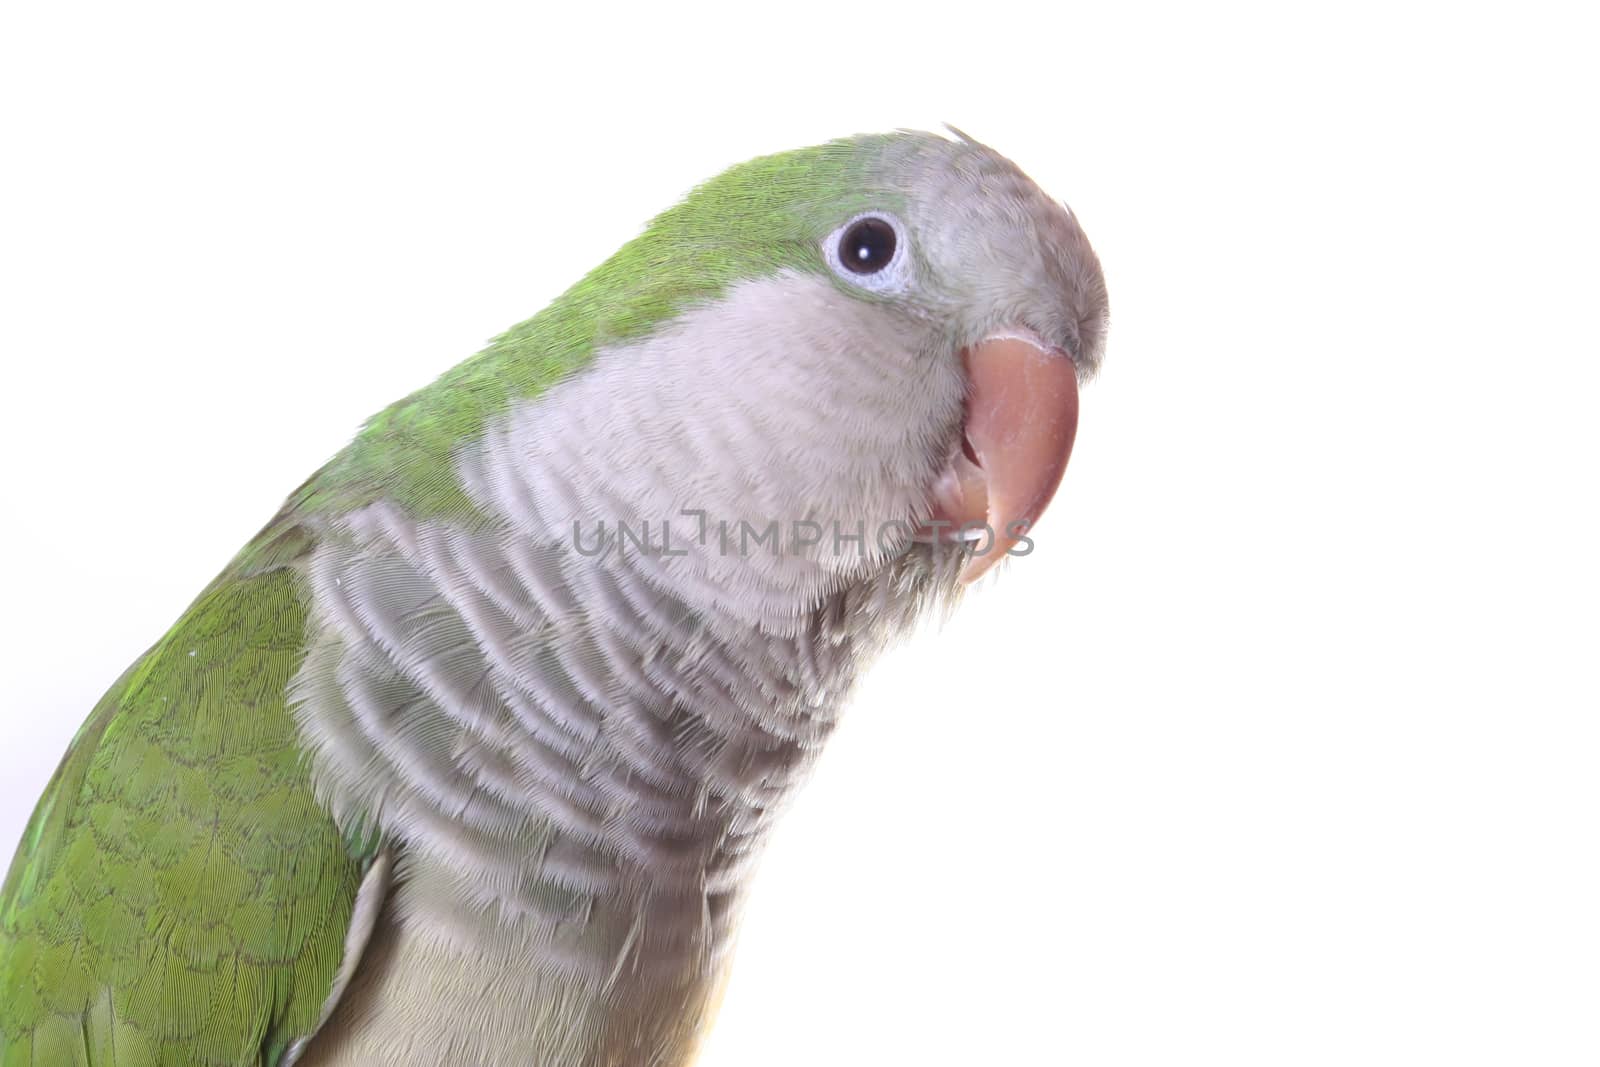 Quaker Parrot on White Background by Marti157900